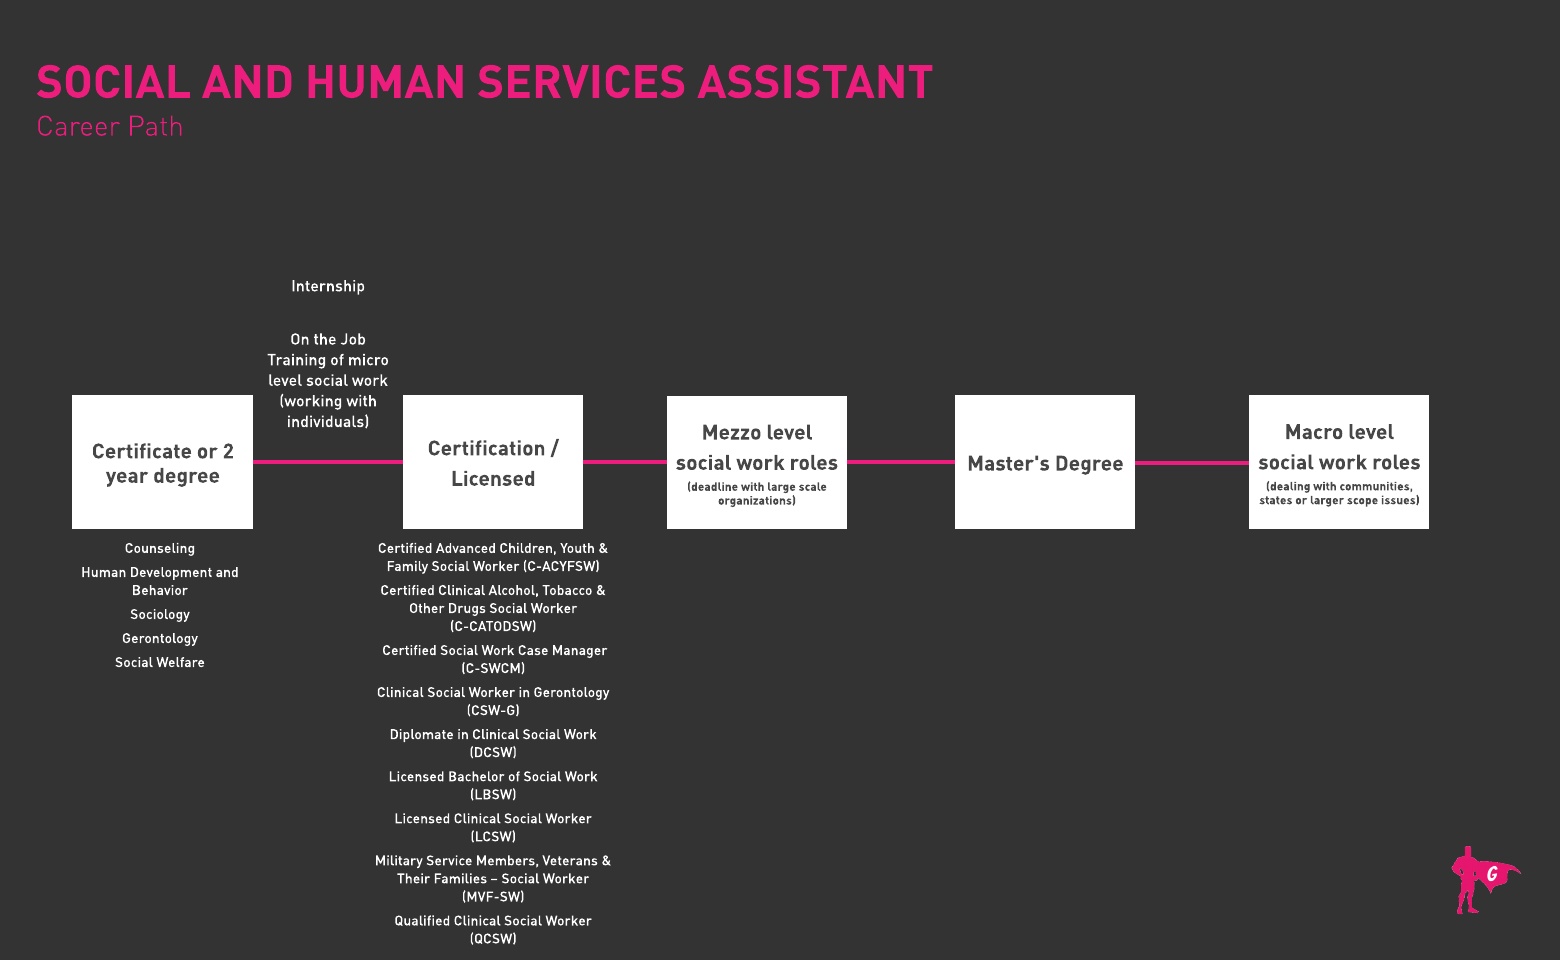 Social and Human Services Assistant Roadmap